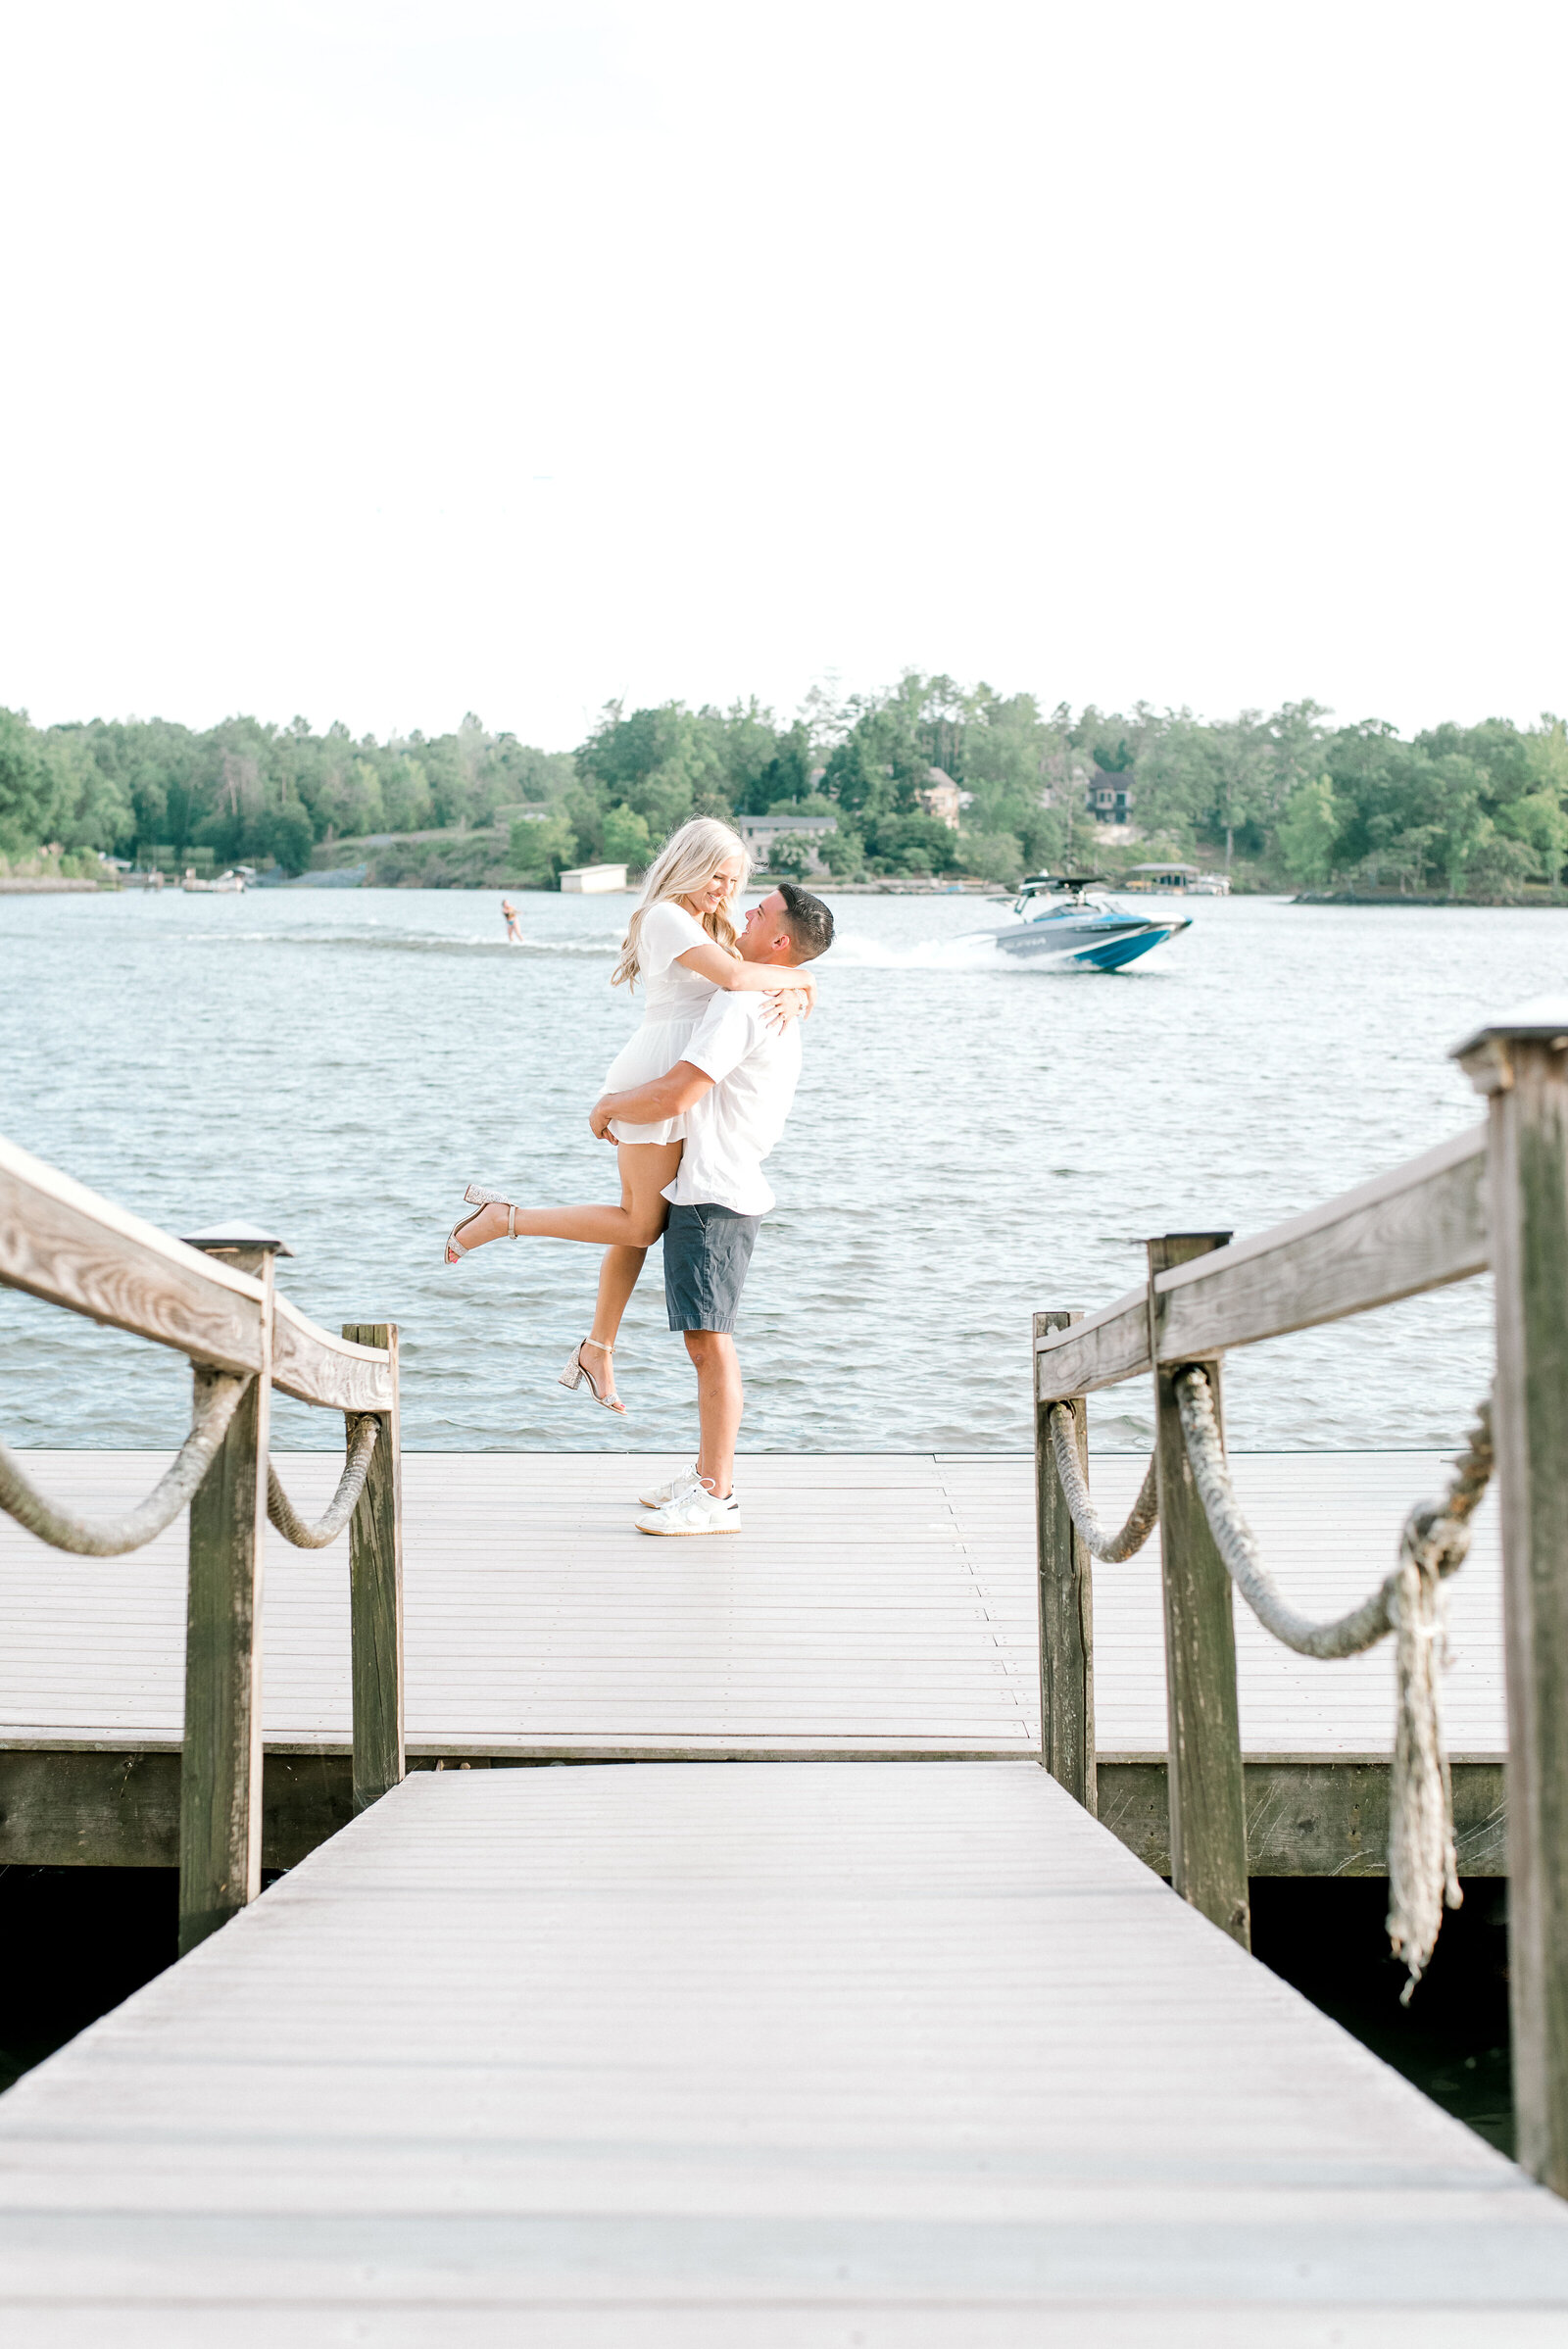 Charlotte-Wedding-Photographer-North-Carolina-Bright-and-Airy-Alyssa-Frost-Photography-Lake-Wylie-Boat-Engagement-2